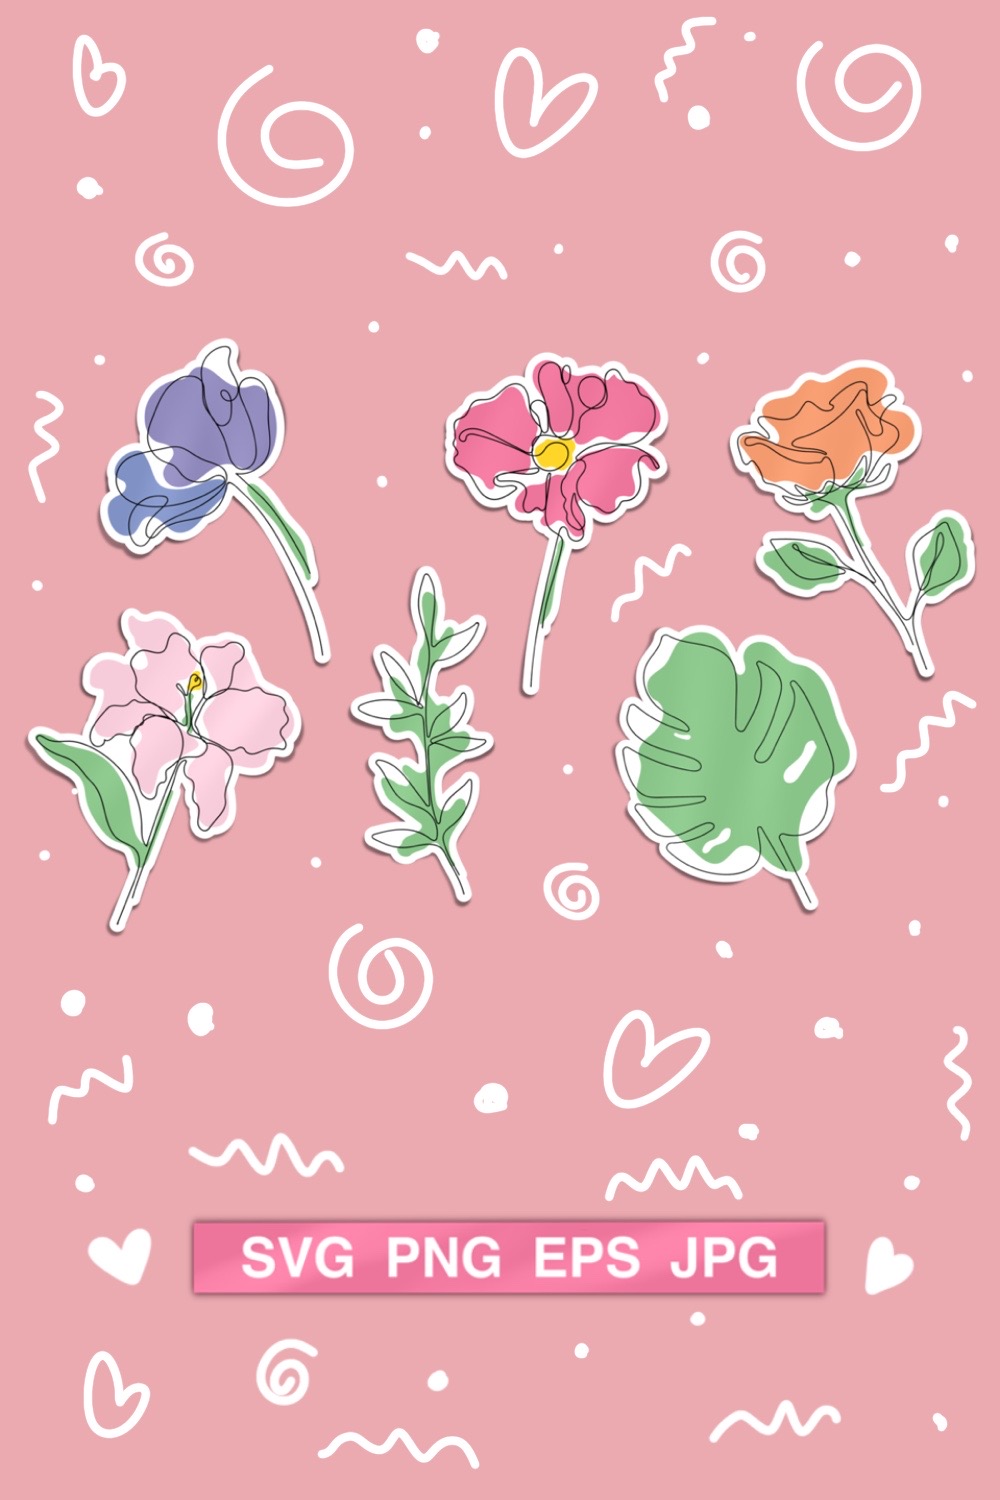 Flowers - One Line Art Clipart Stickers pinterest image.